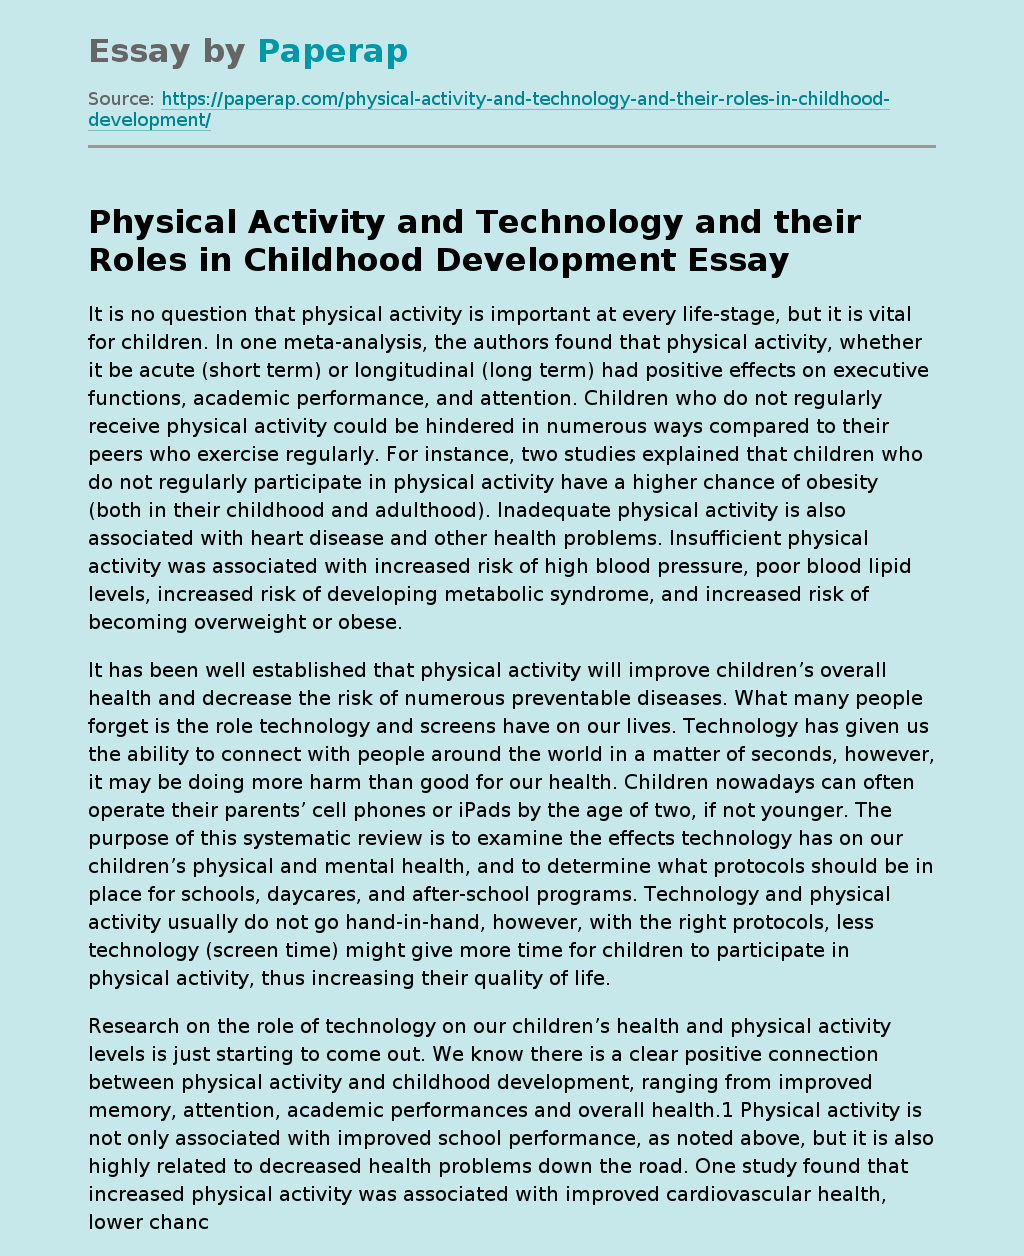 Physical Activity and Technology and their Roles in Childhood Development